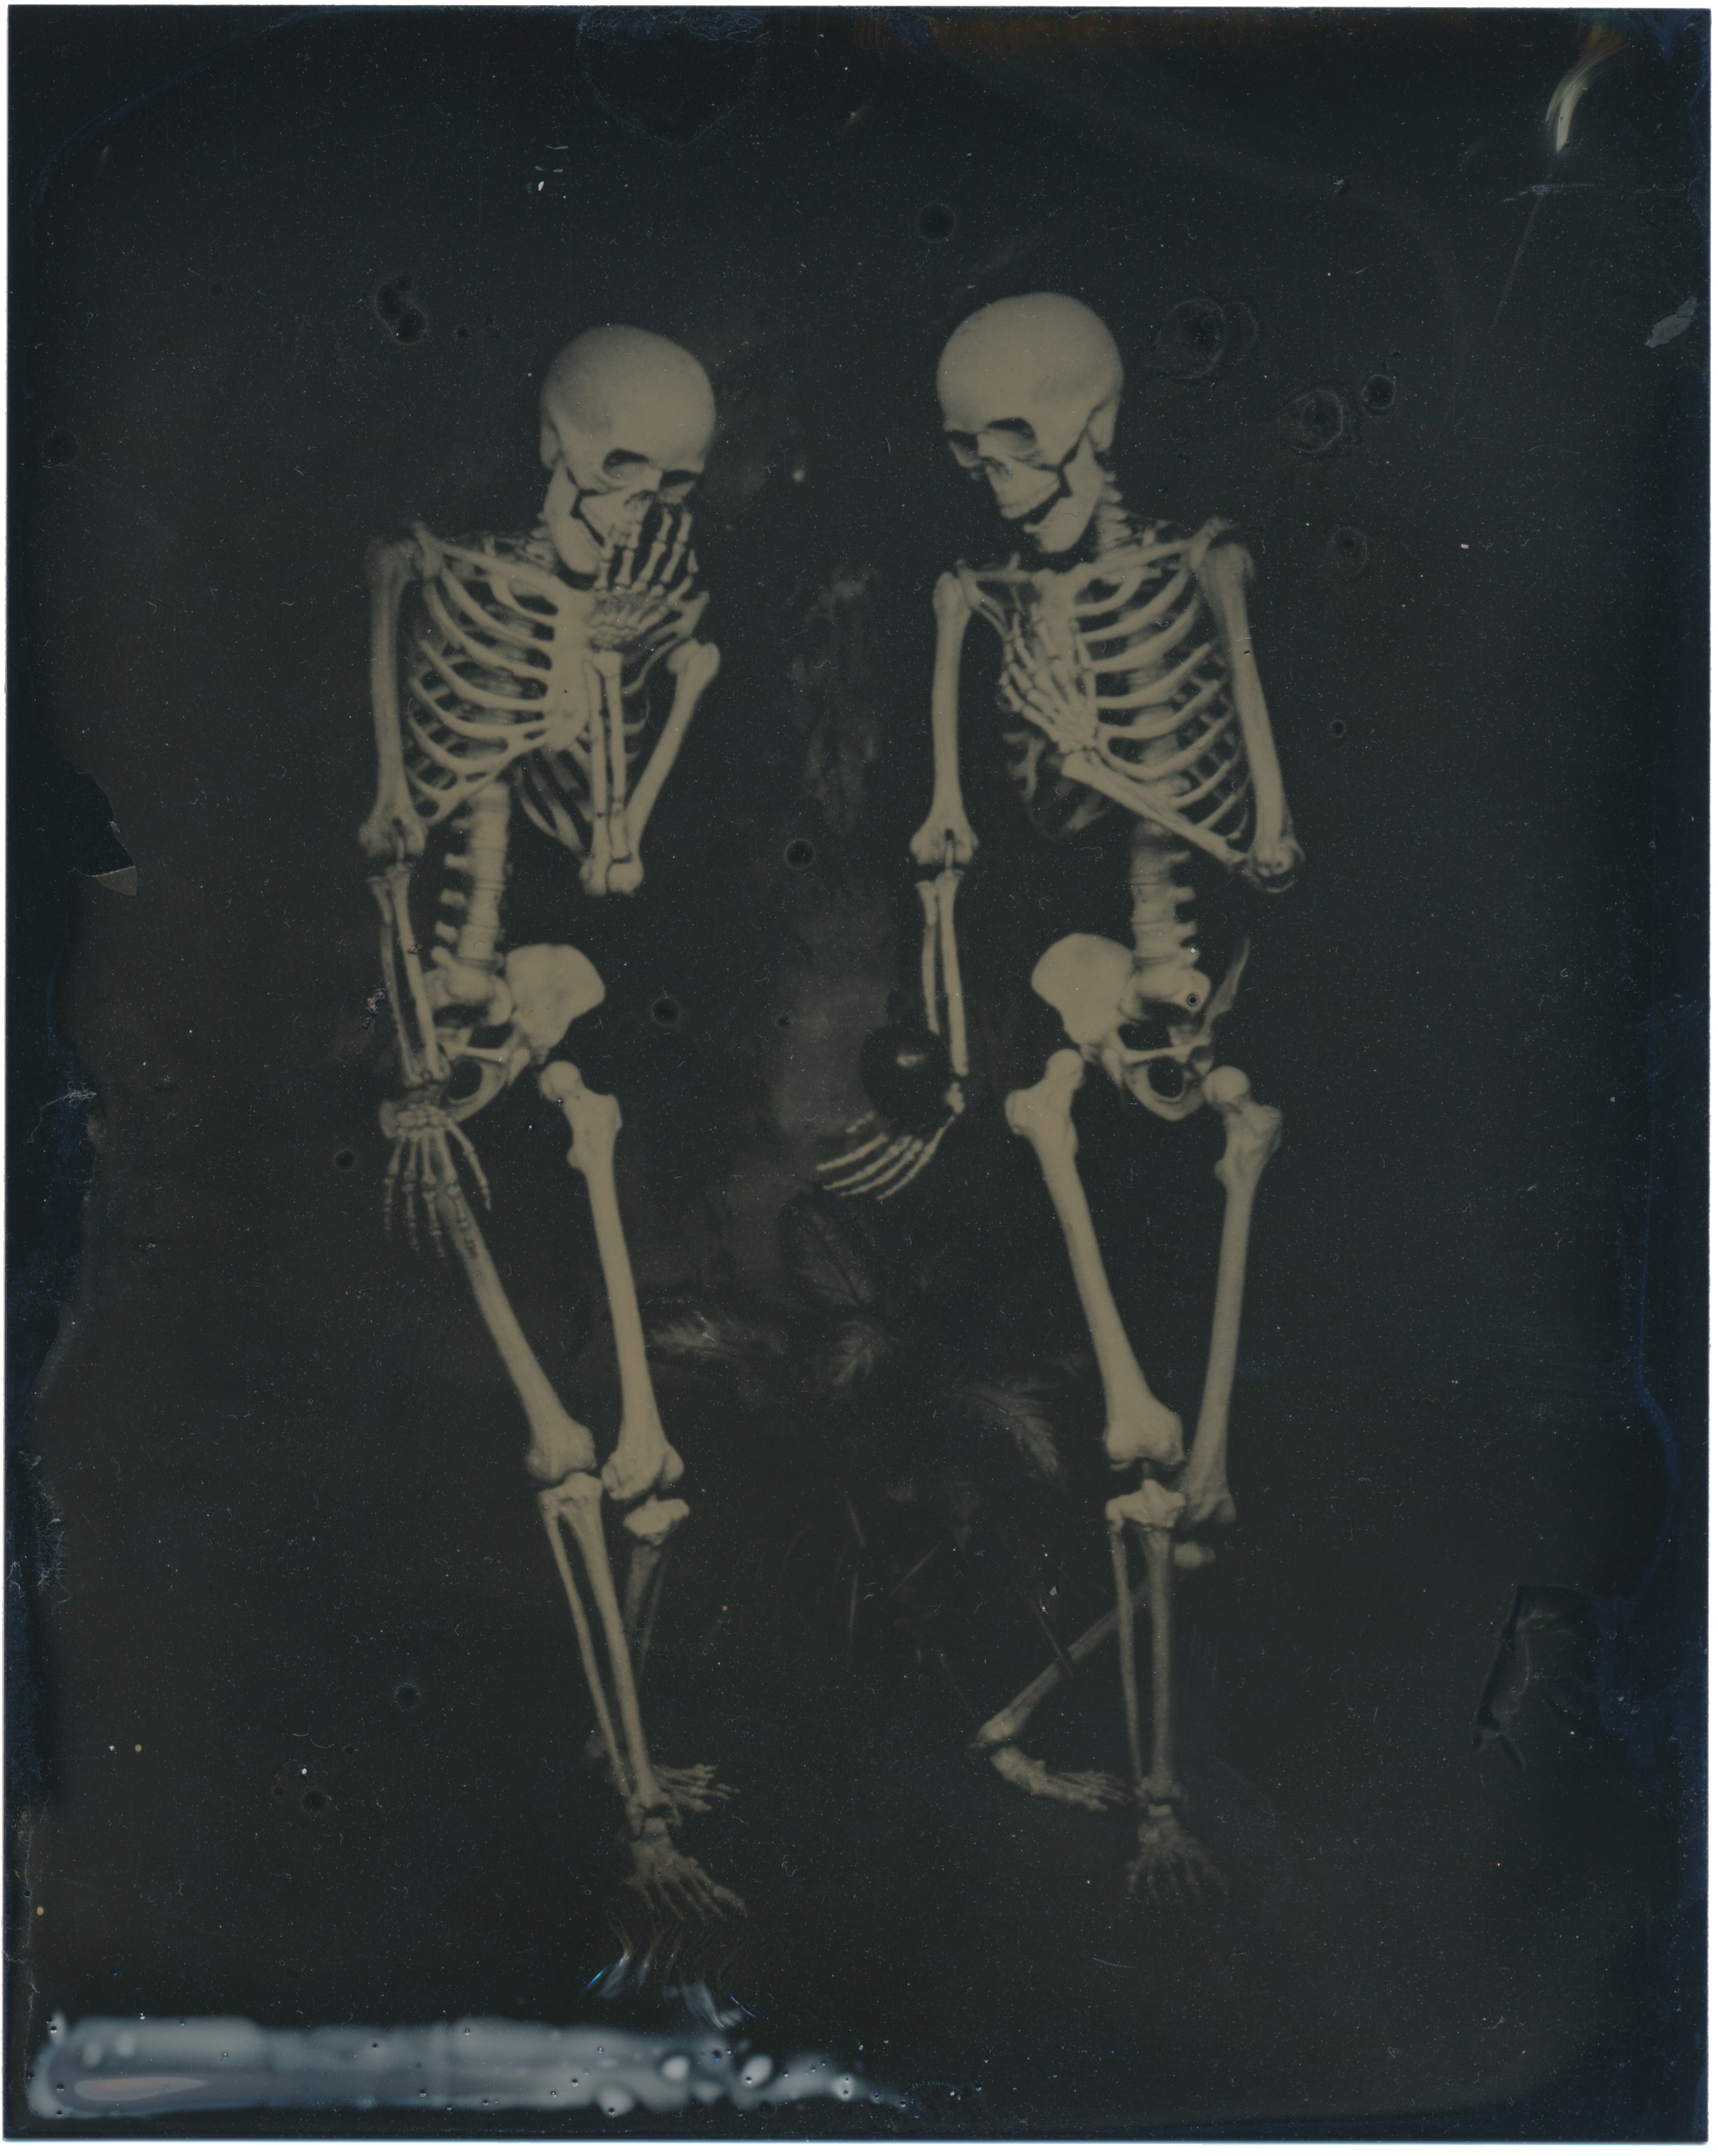   After the Fall of Man   2015  Tintype  4x5 